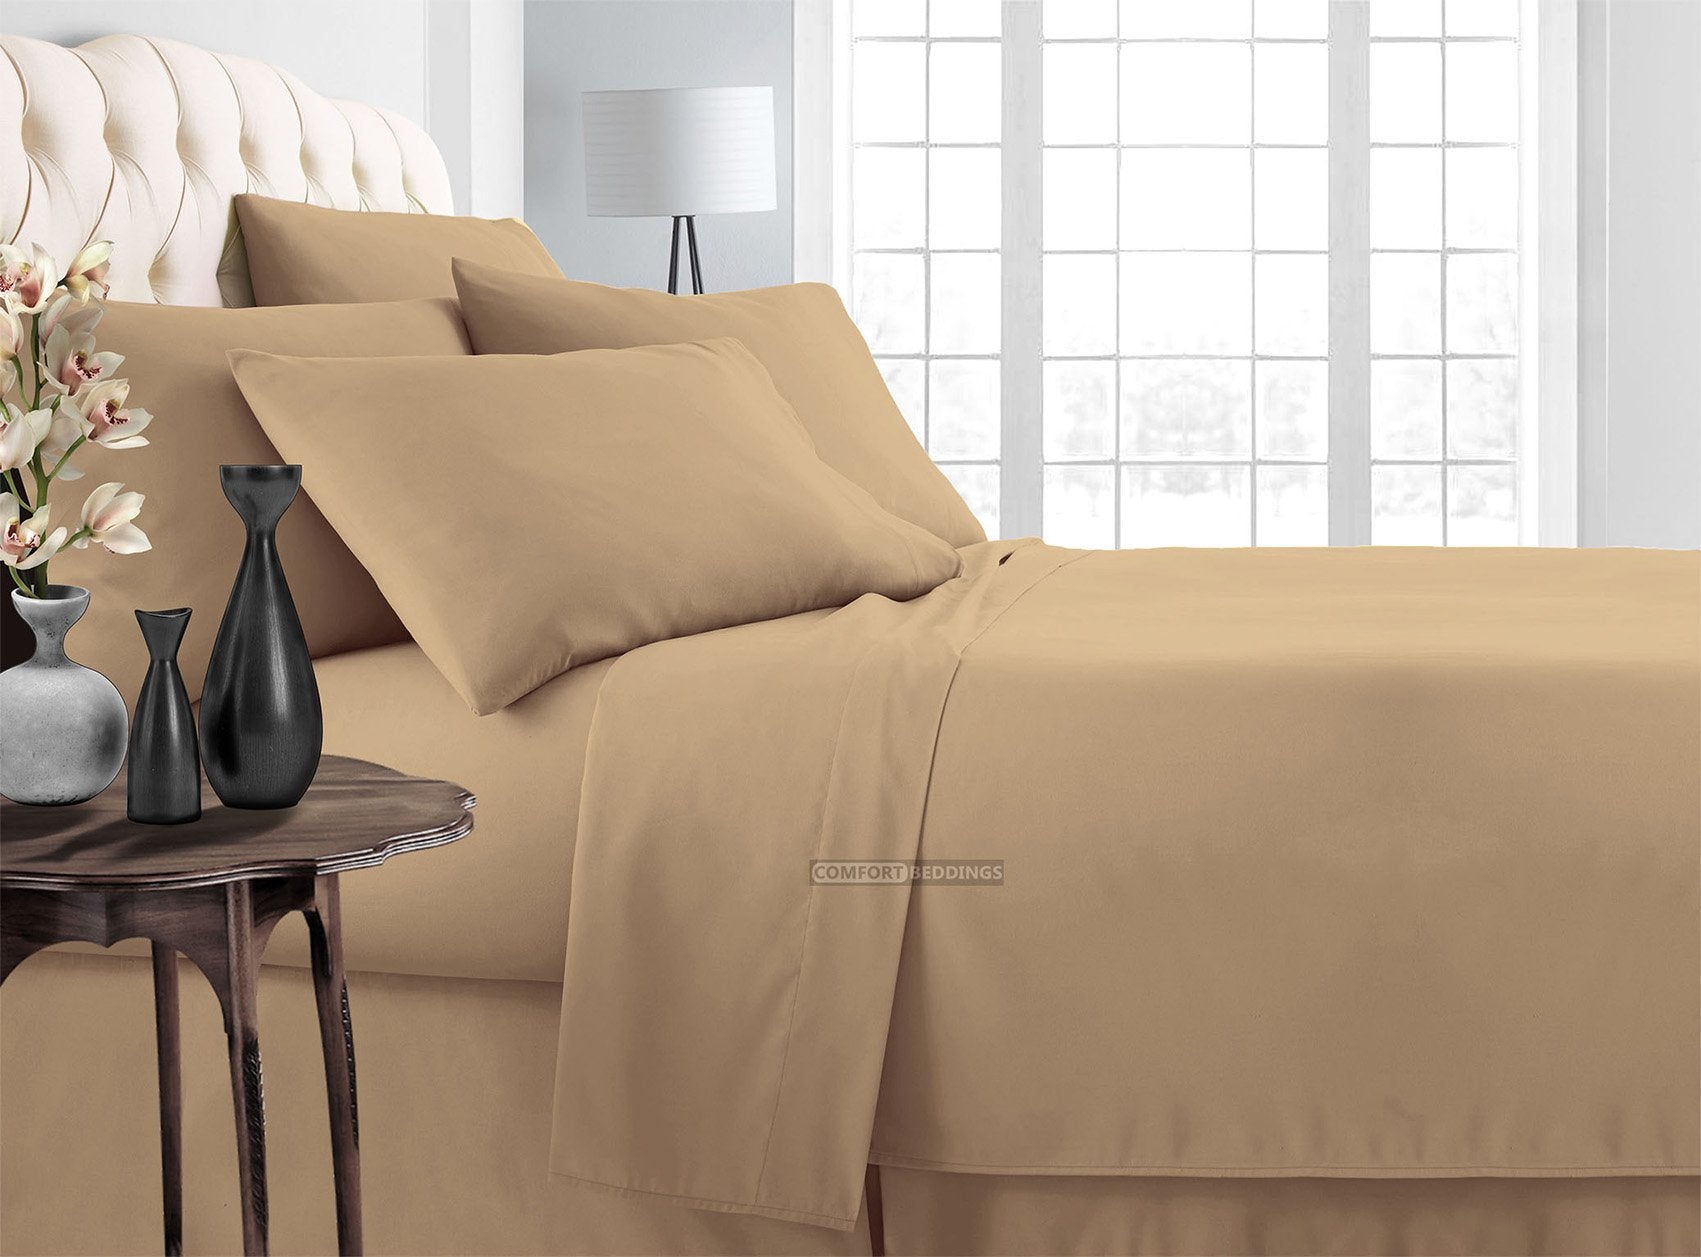 Taupe bed in a bag